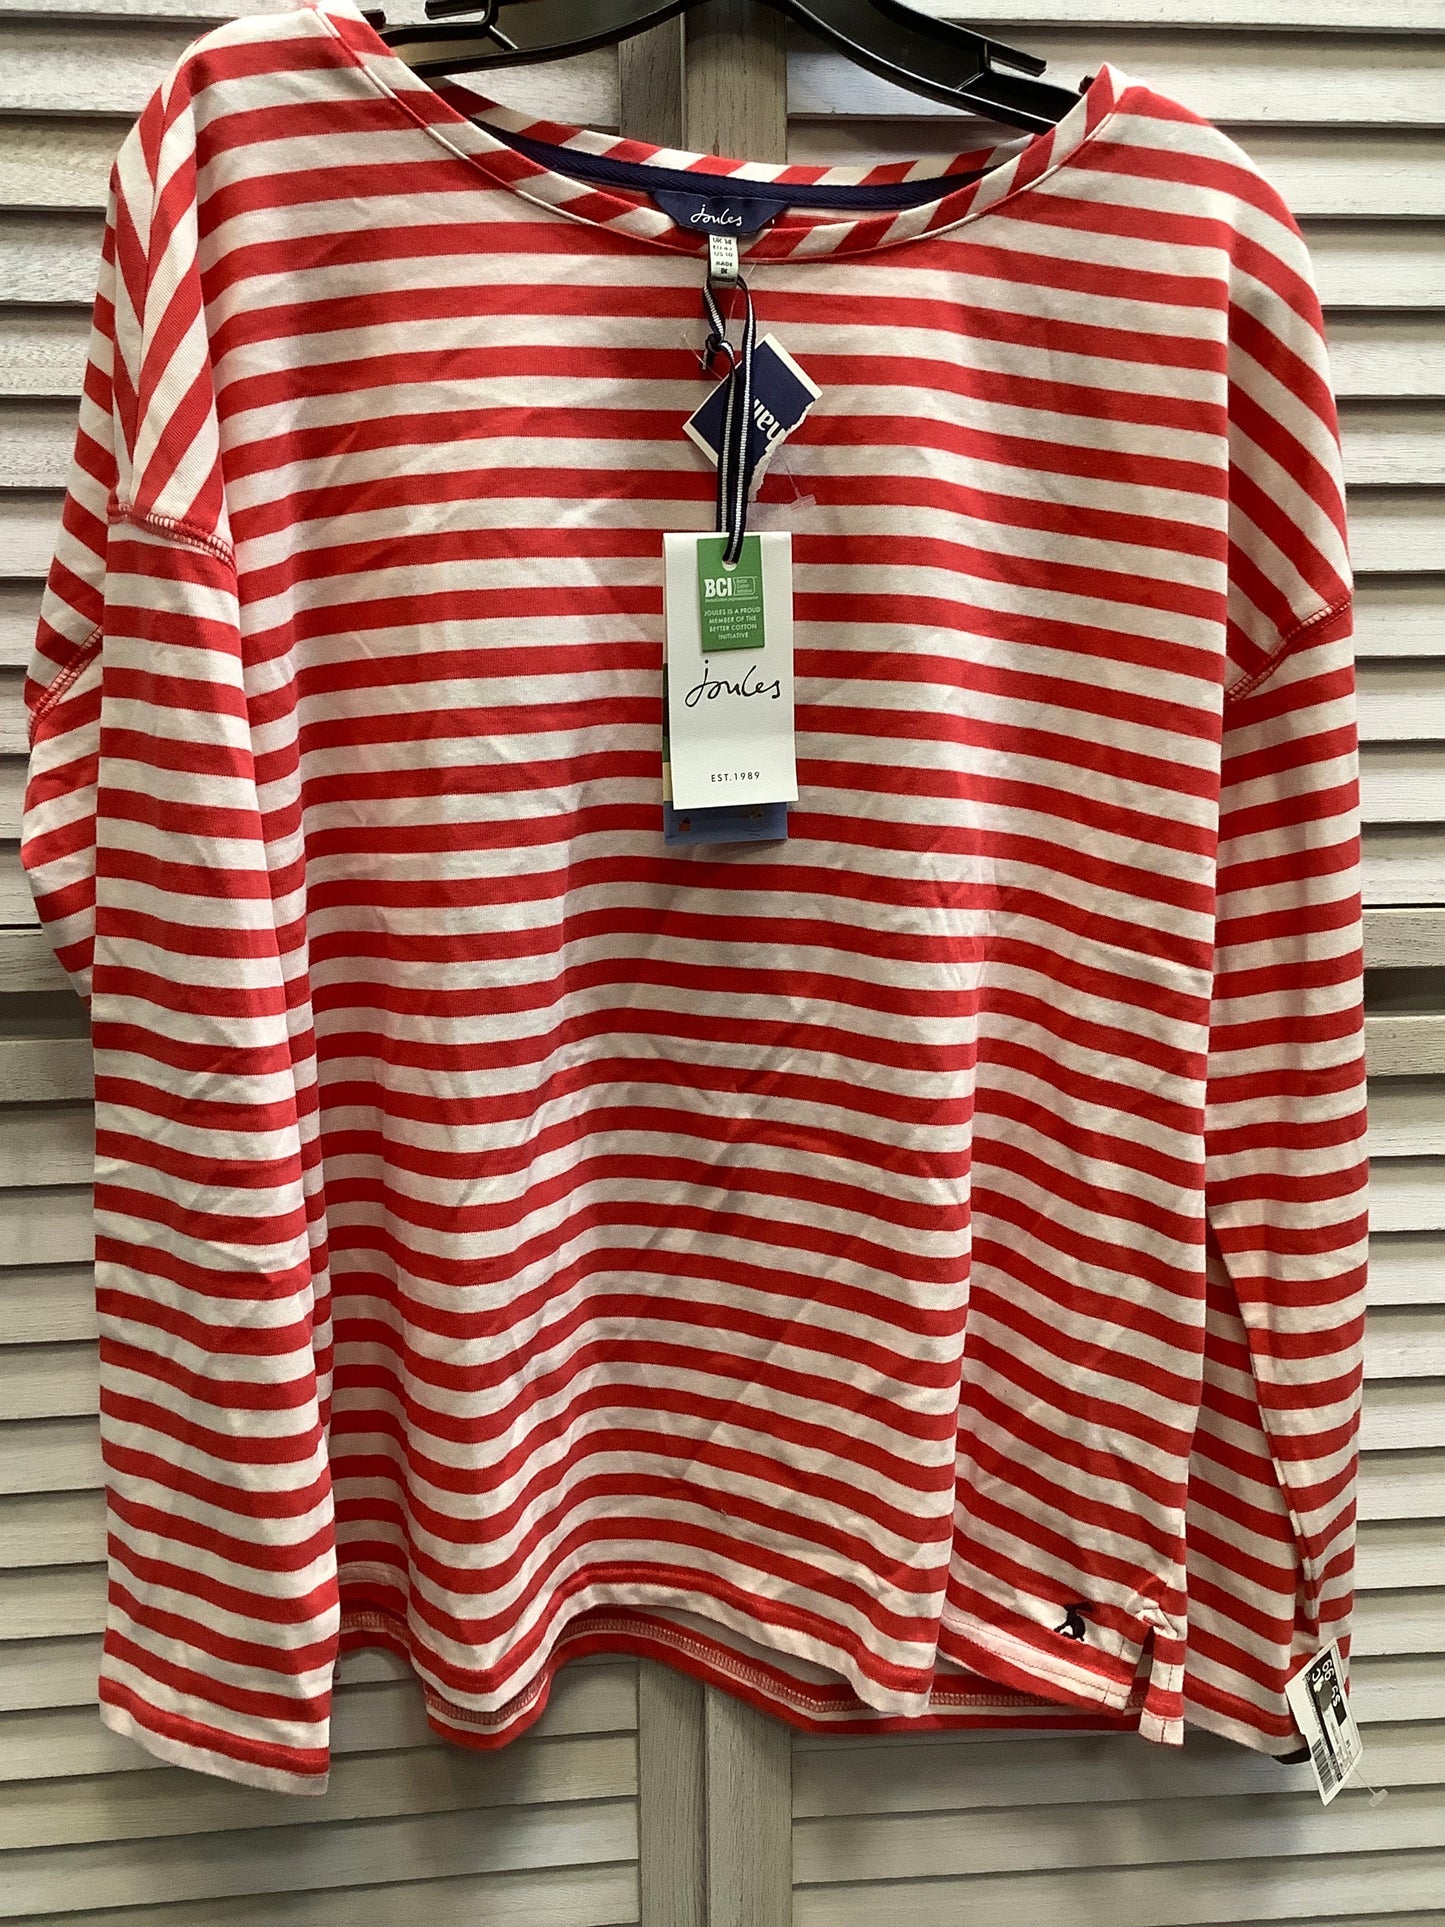 Striped Pattern Top Long Sleeve Joules, Size 10